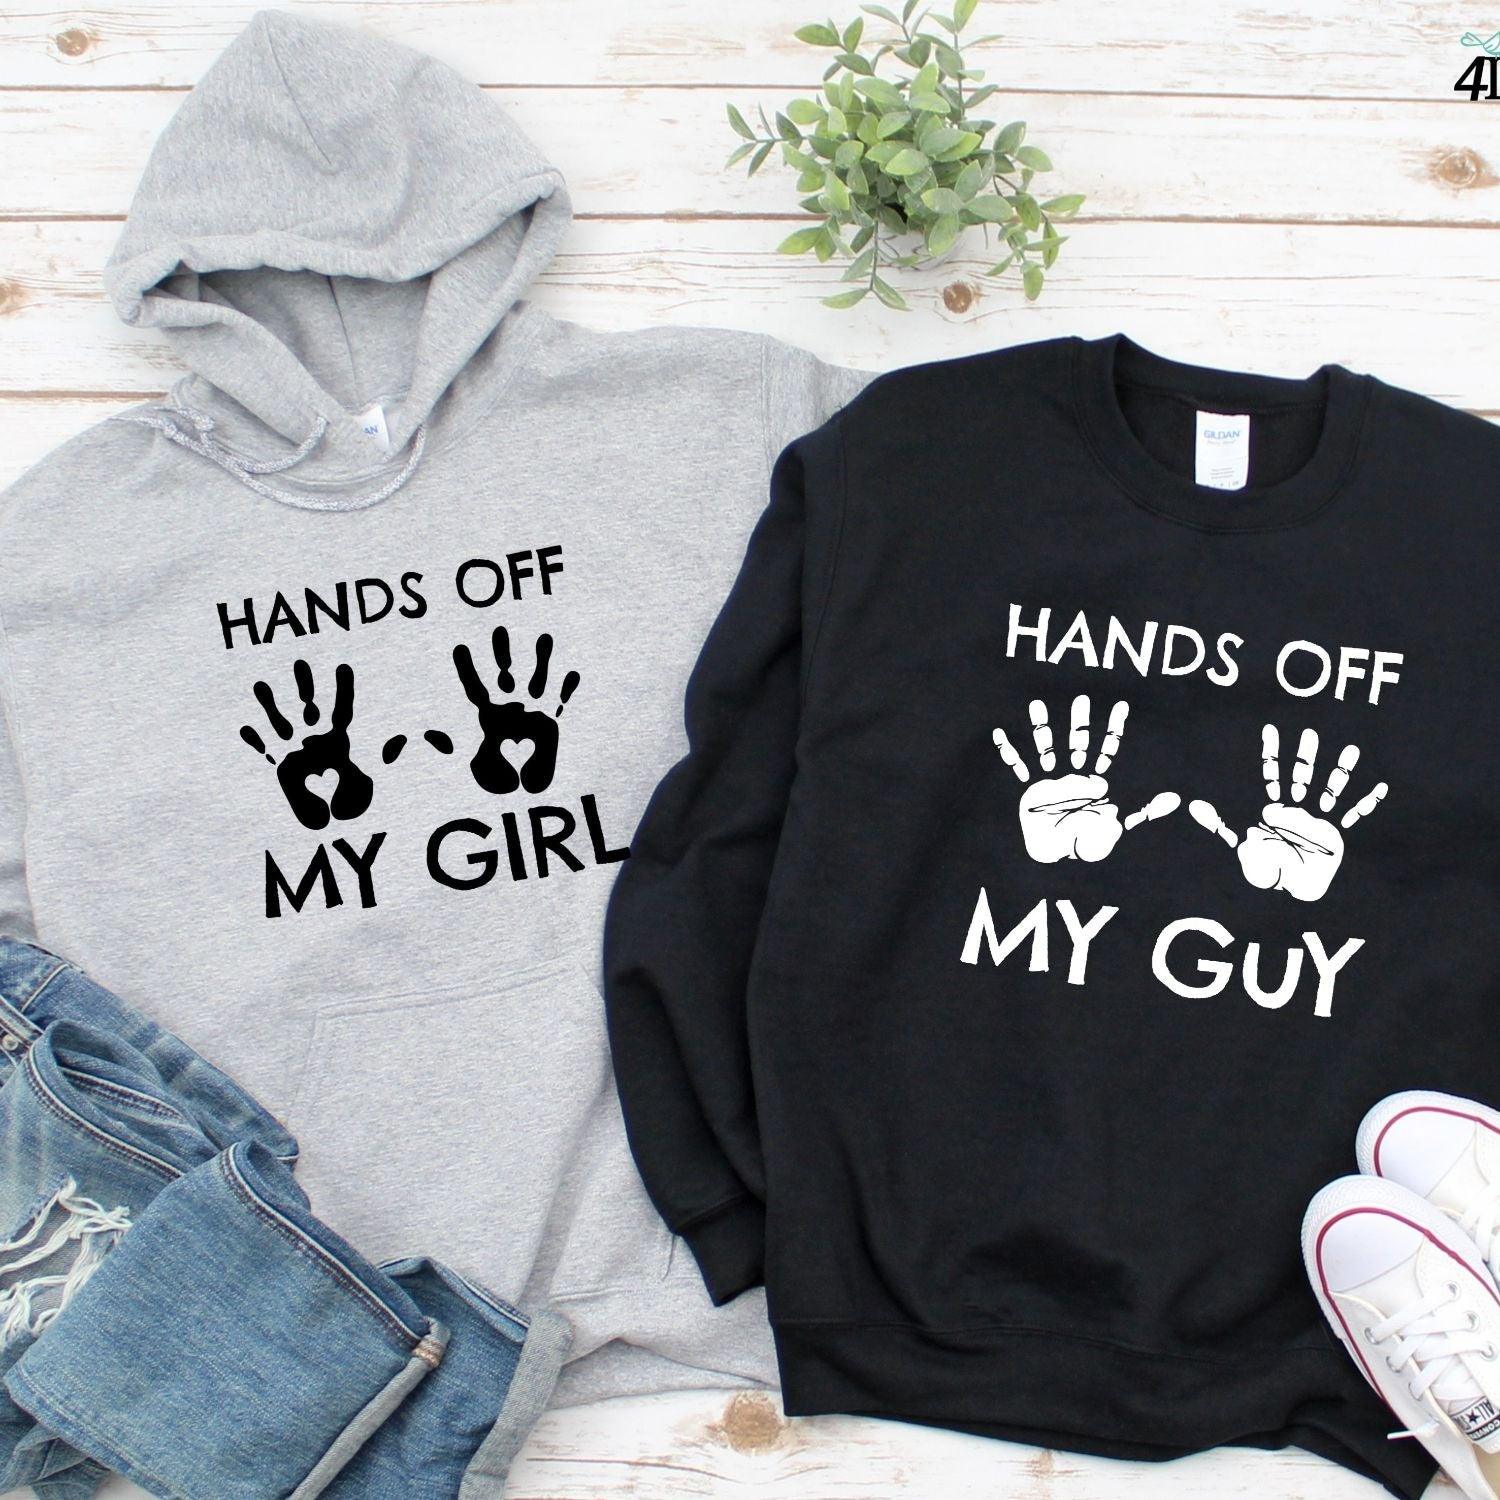 Hands Off My Girl/My Guy Set, Funny Jealous Outfits, Anniversary Gift, Matching Set - 4Lovebirds